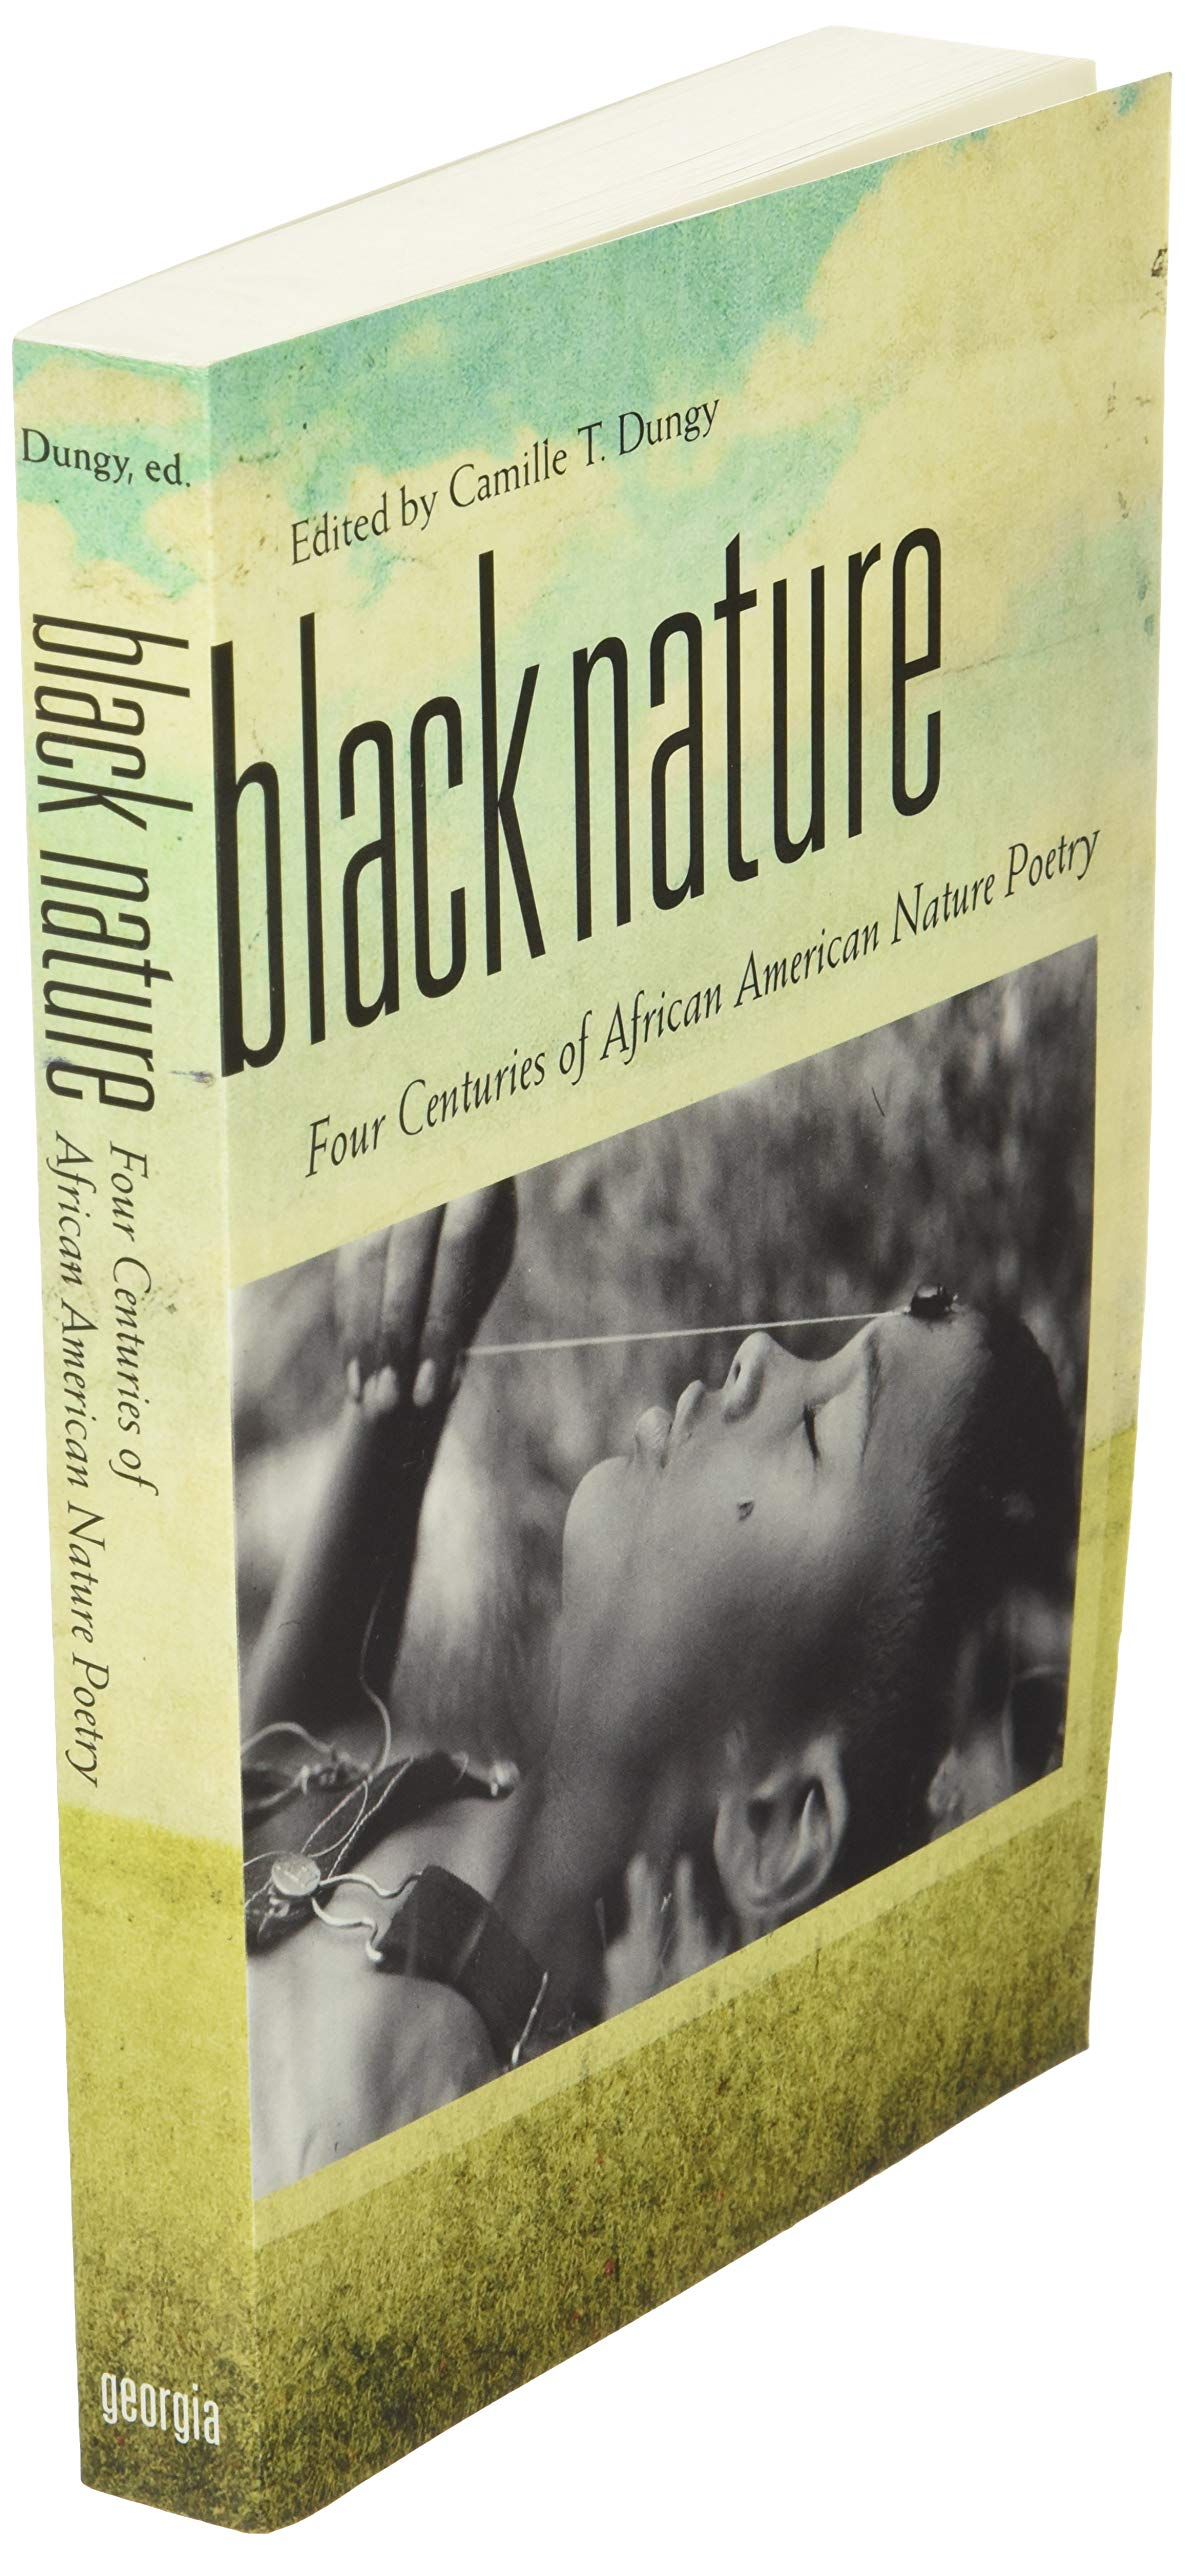 <p><strong>$25.39</strong></p><p>“Black poets have long had a tradition of incorporating the natural world into their work, although nature writing is a genre that historically hasn’t been counted as one in which they have participated,” according to the book’s synopsis. In this 432-page anthology, Camille T. Dungy selects 180 poems from 93 African American poets that provide unique perspectives on the great outdoors, the wild, and more. The collection includes such acclaimed writers as Gwendolyn Brooks, Rita Dove, Phillis Wheatley, Sterling Brown, and other writers who lived during Reconstruction, the Harlem Renaissance, the Black Arts Movement, and other time periods.</p>